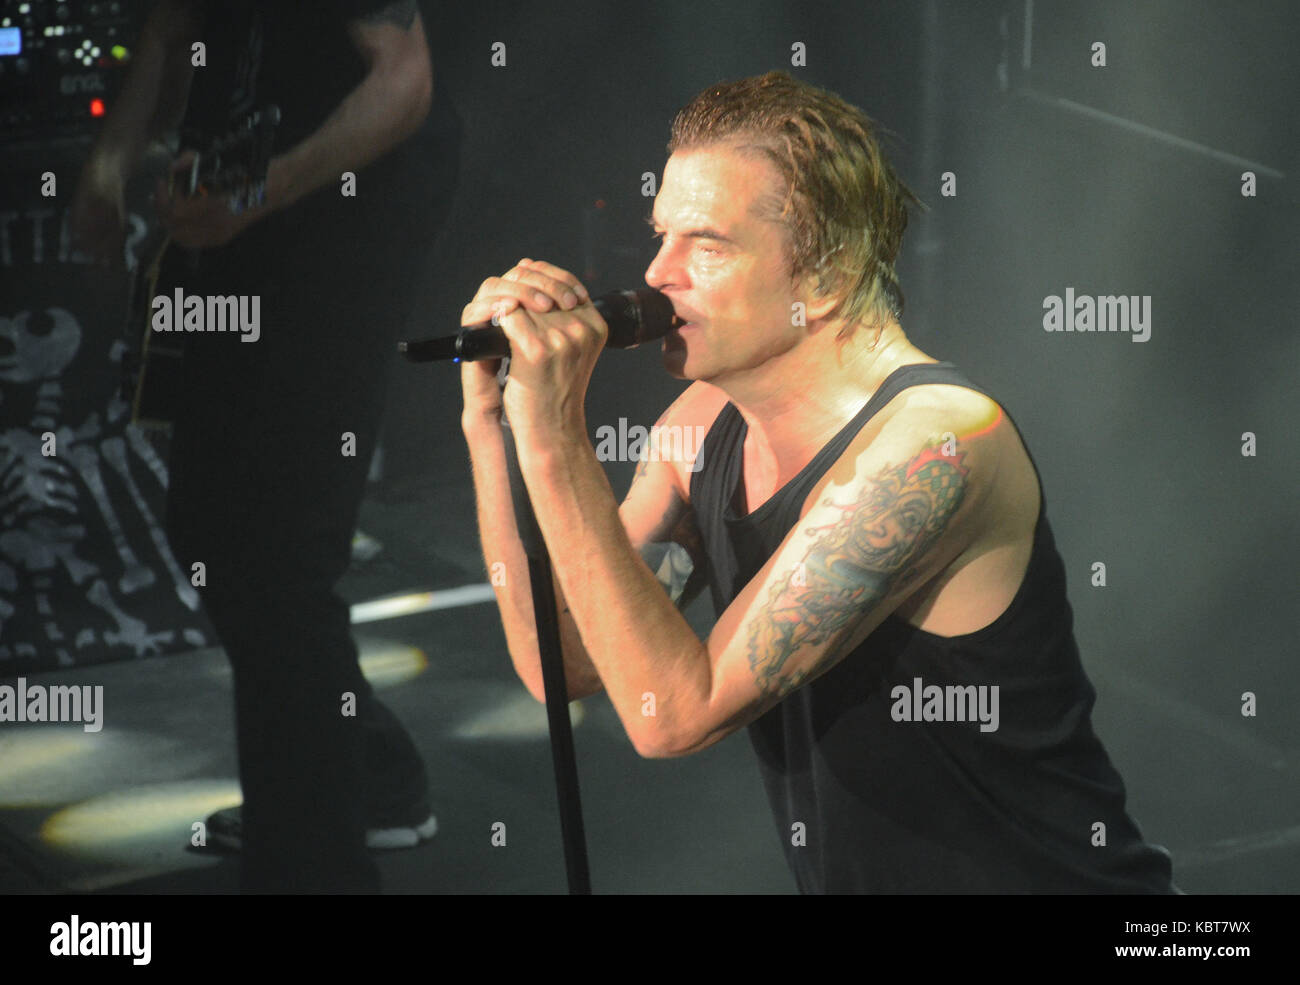 Campino, singer with the German punk rock band Die Toten Hosen, performing  at a concert in Buenos Aires, Argentina, 30 September 2017. The sold-out  concert marked the 25th anniversary of the band's